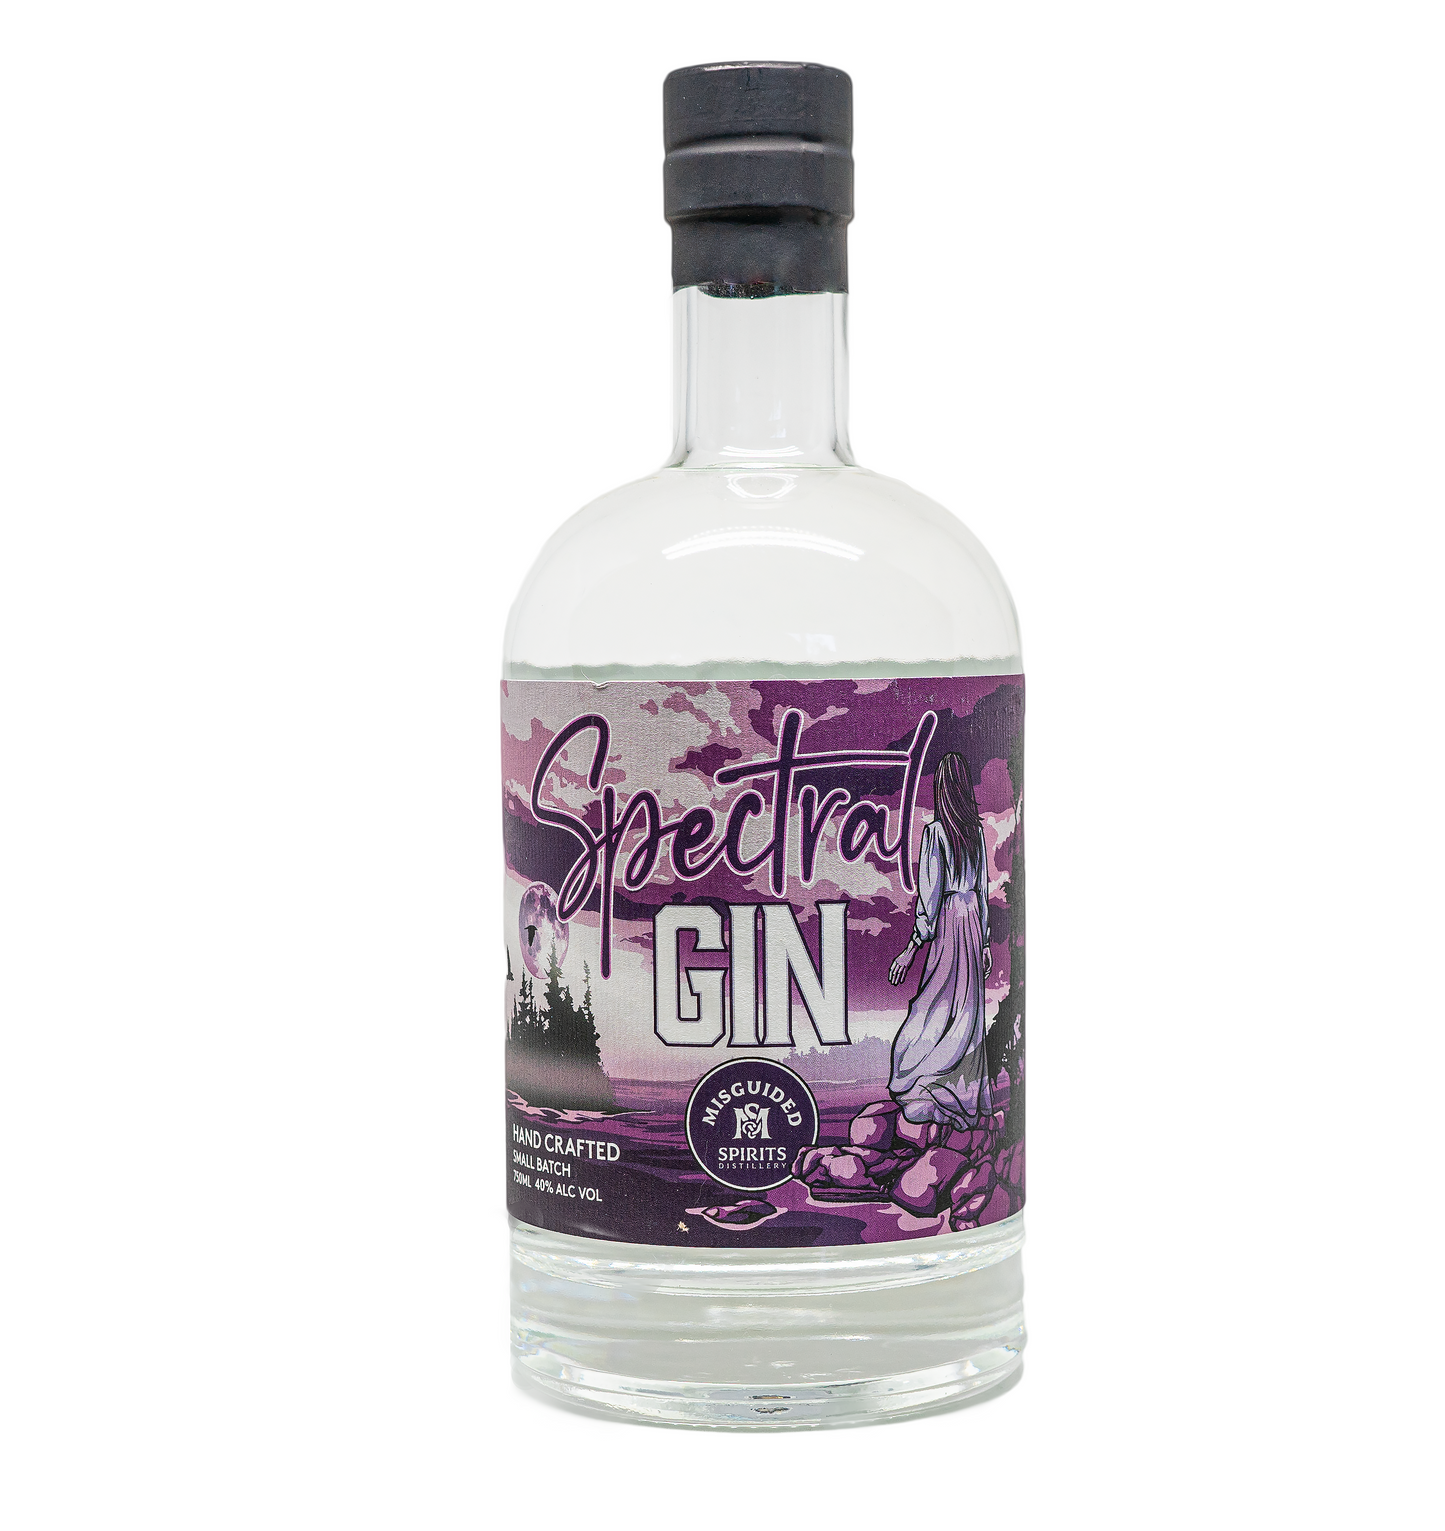 Spectral Gin